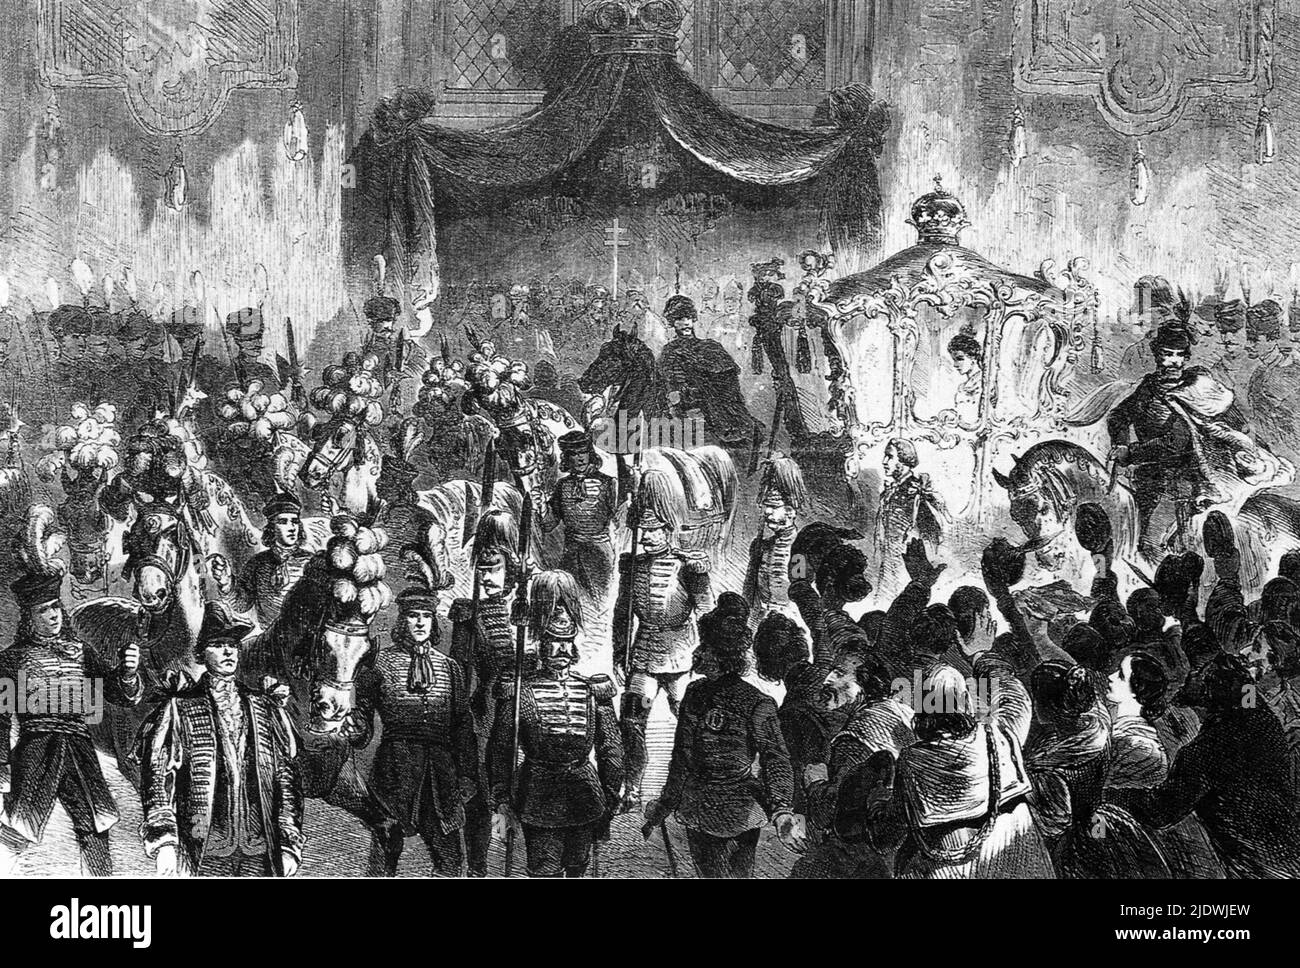 1866 , Budapest , Hungary    : The celebrated austrian  Empress Elisabeth of HABSBURG   ( SISSI von Wittelsbach  , 1937 - 1898 )  arrive in Budapest for negotiations with Hungary over a settlement know as the AUSGLEICH . The day 8 june 1867 SIISI was crowned Queen of Hungary and Kaiser Franz Josef King of Hungary  ( 1830 - 1916 ) , Emperor of Austria , King of Hungary and Bohemia .  - FRANCESCO GIUSEPPE - JOSEPH - ABSBURG - ASBURG - ASBURGO - NOBILITY - NOBILI - NOBILTA' - REALI  - HASBURG - ROYALTY - ELISABETTA DI BAVIERA  - UNGHERIA - carrozza   ----  Archivio GBB Stock Photo